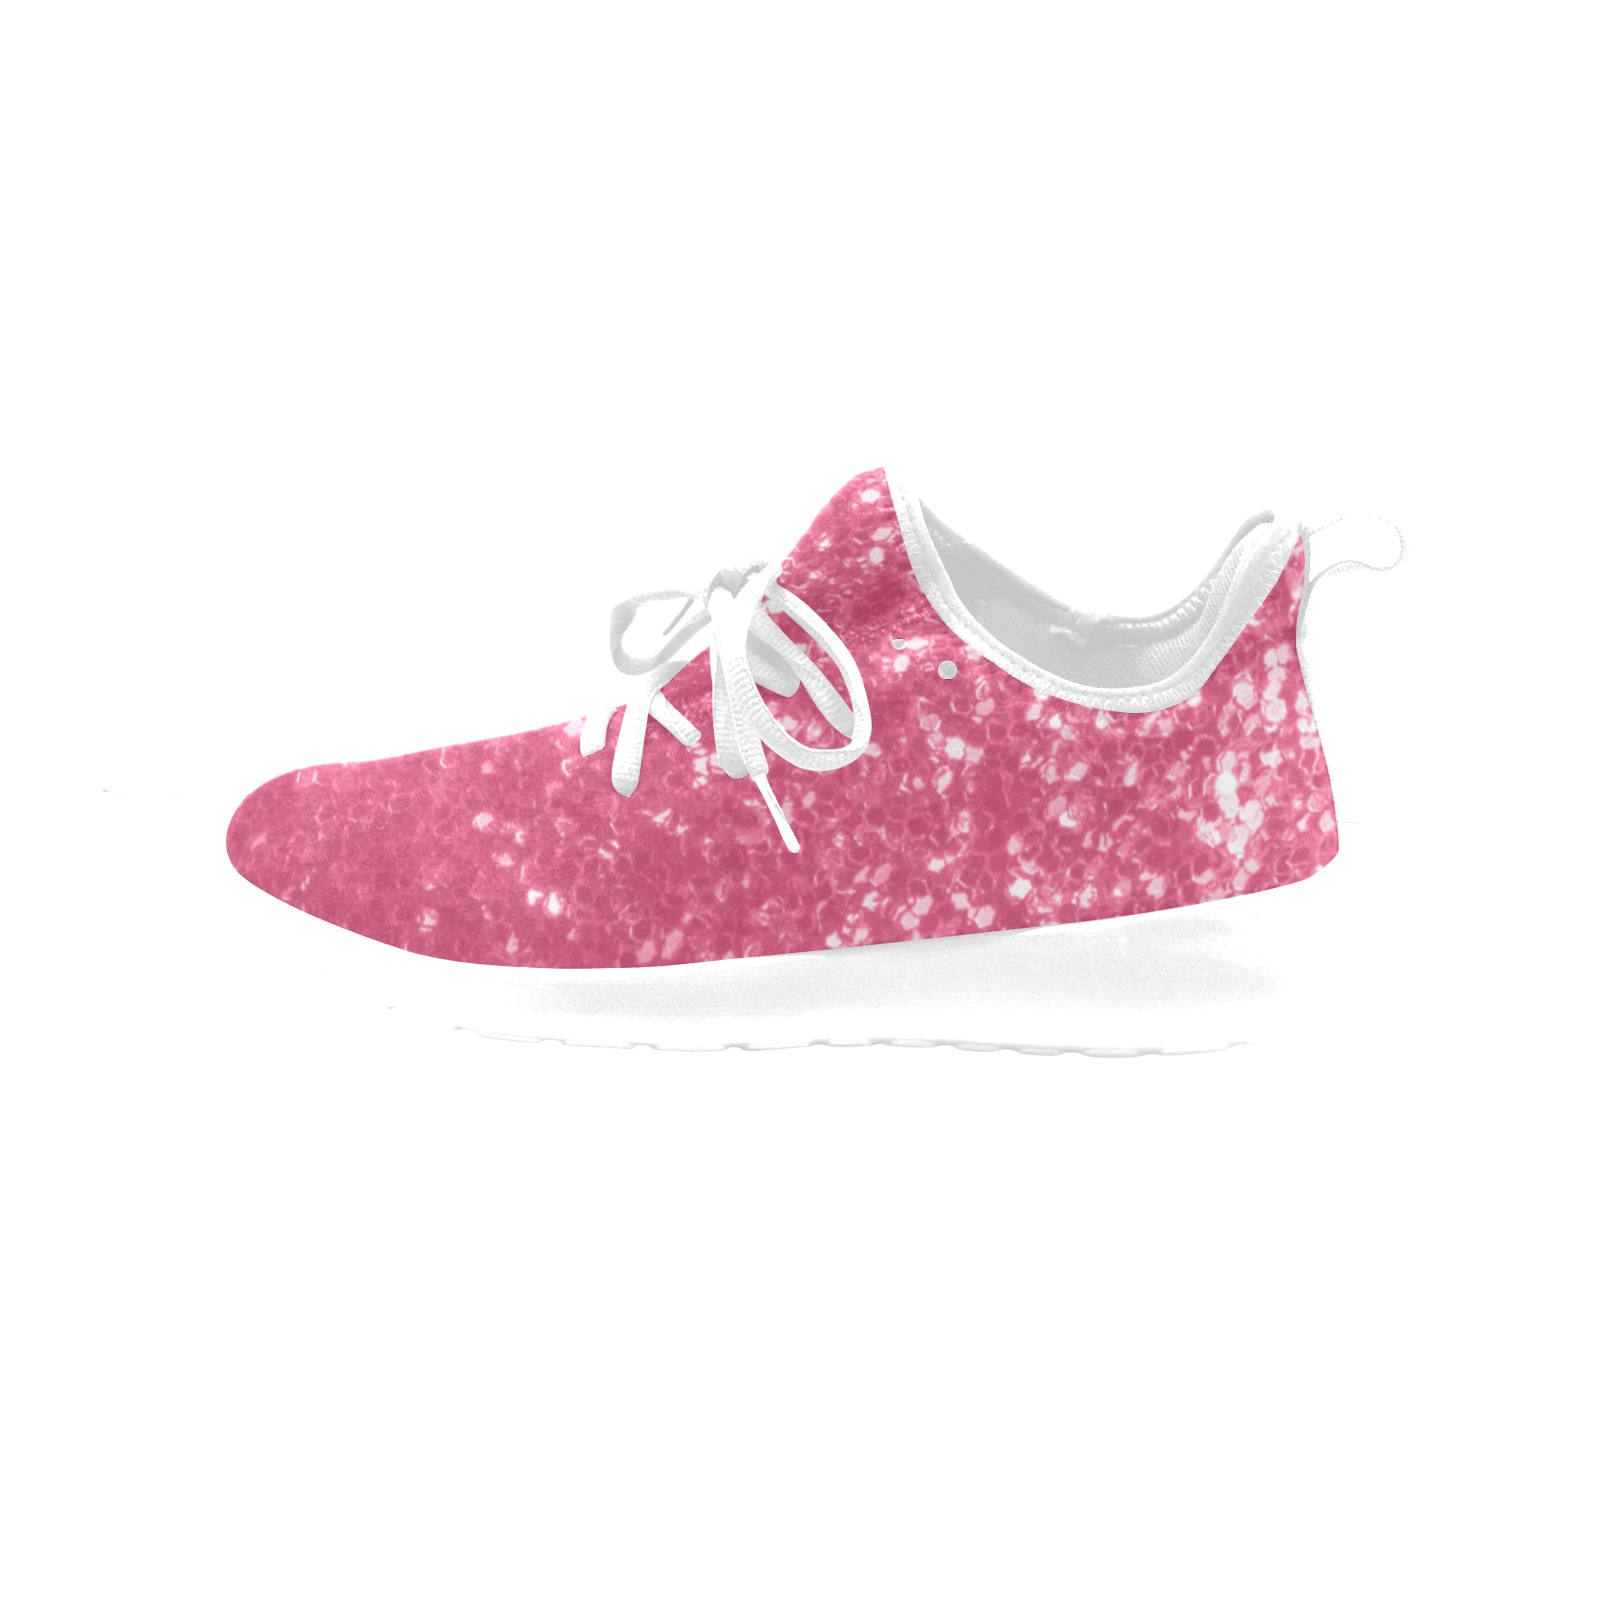 Magenta light pink red faux sparkles glitter Women's One-Piece Vamp Sneakers (Model 67502)